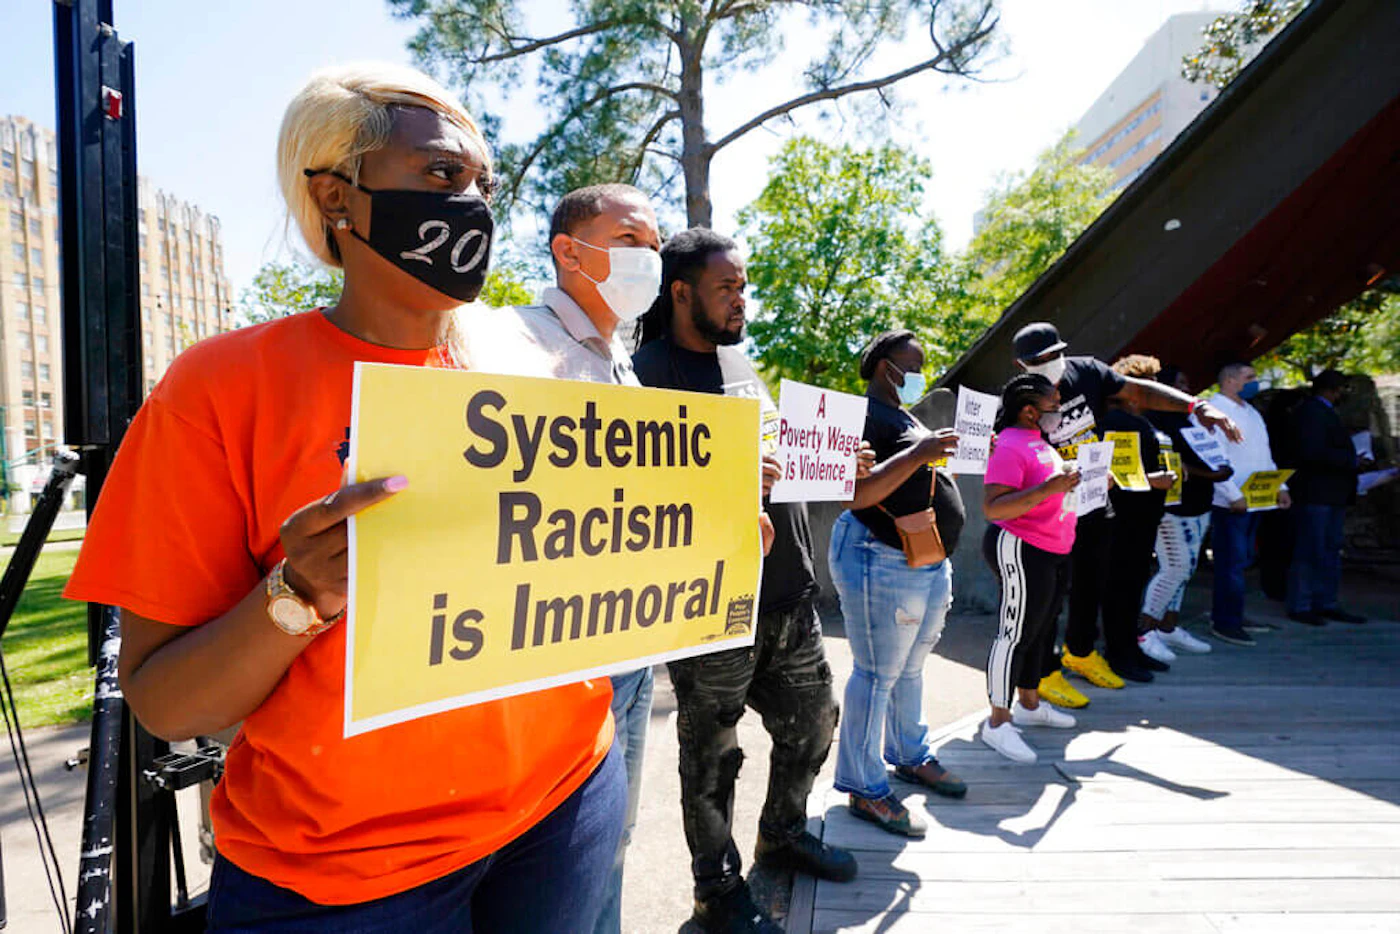 Participants of a Poor People's Campaign: A National Call for Moral Revival assembly and news briefing in Jackson, Miss., hold signs listing a variety of issues in April 2021. (Image via AP Photo/Rogelio V. Solis)